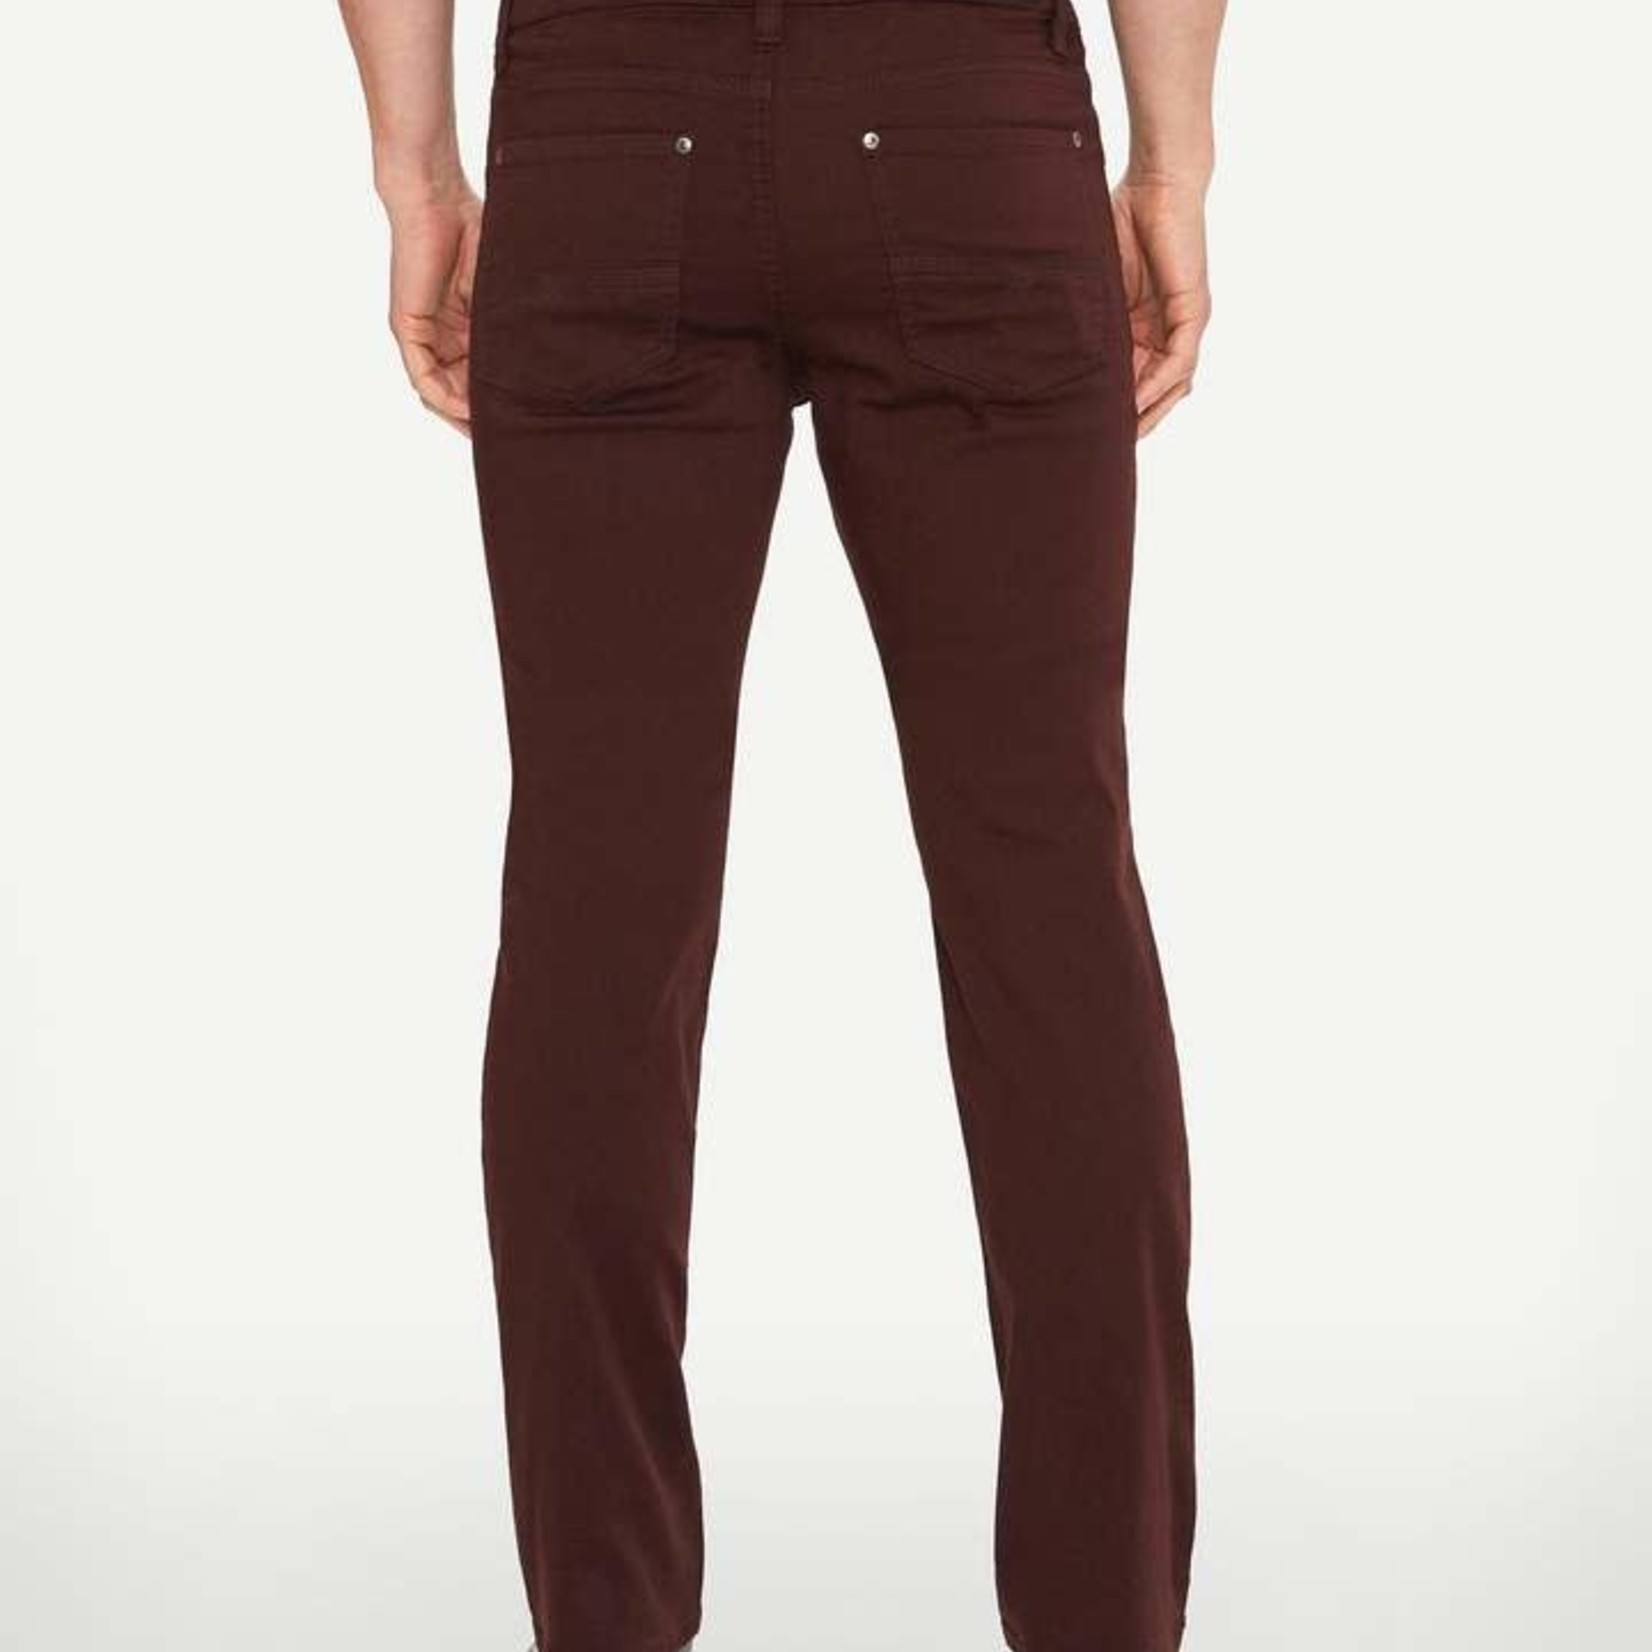 Lois Jeans Canada The "Brad Slim 6240-07" by Lois Jeans